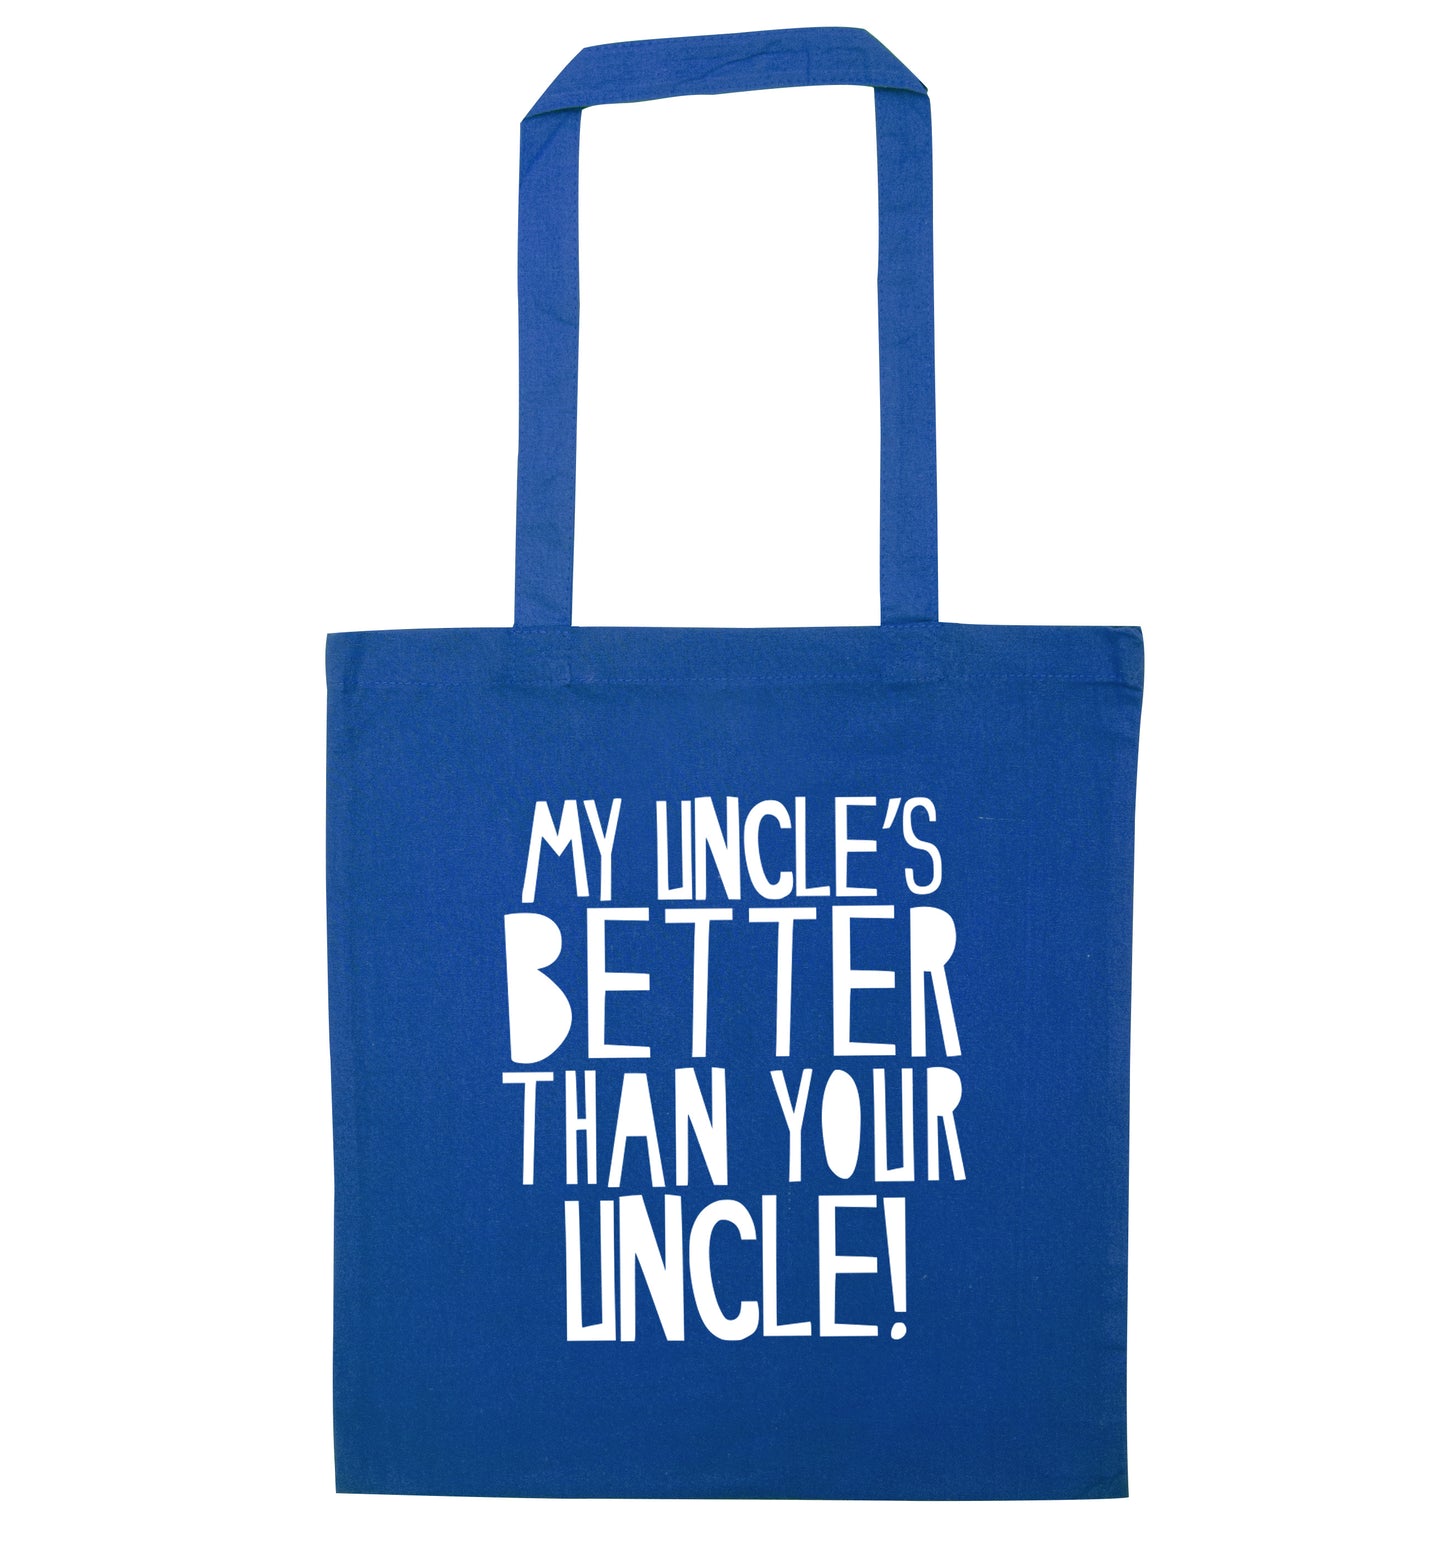 My uncles better than your uncle blue tote bag